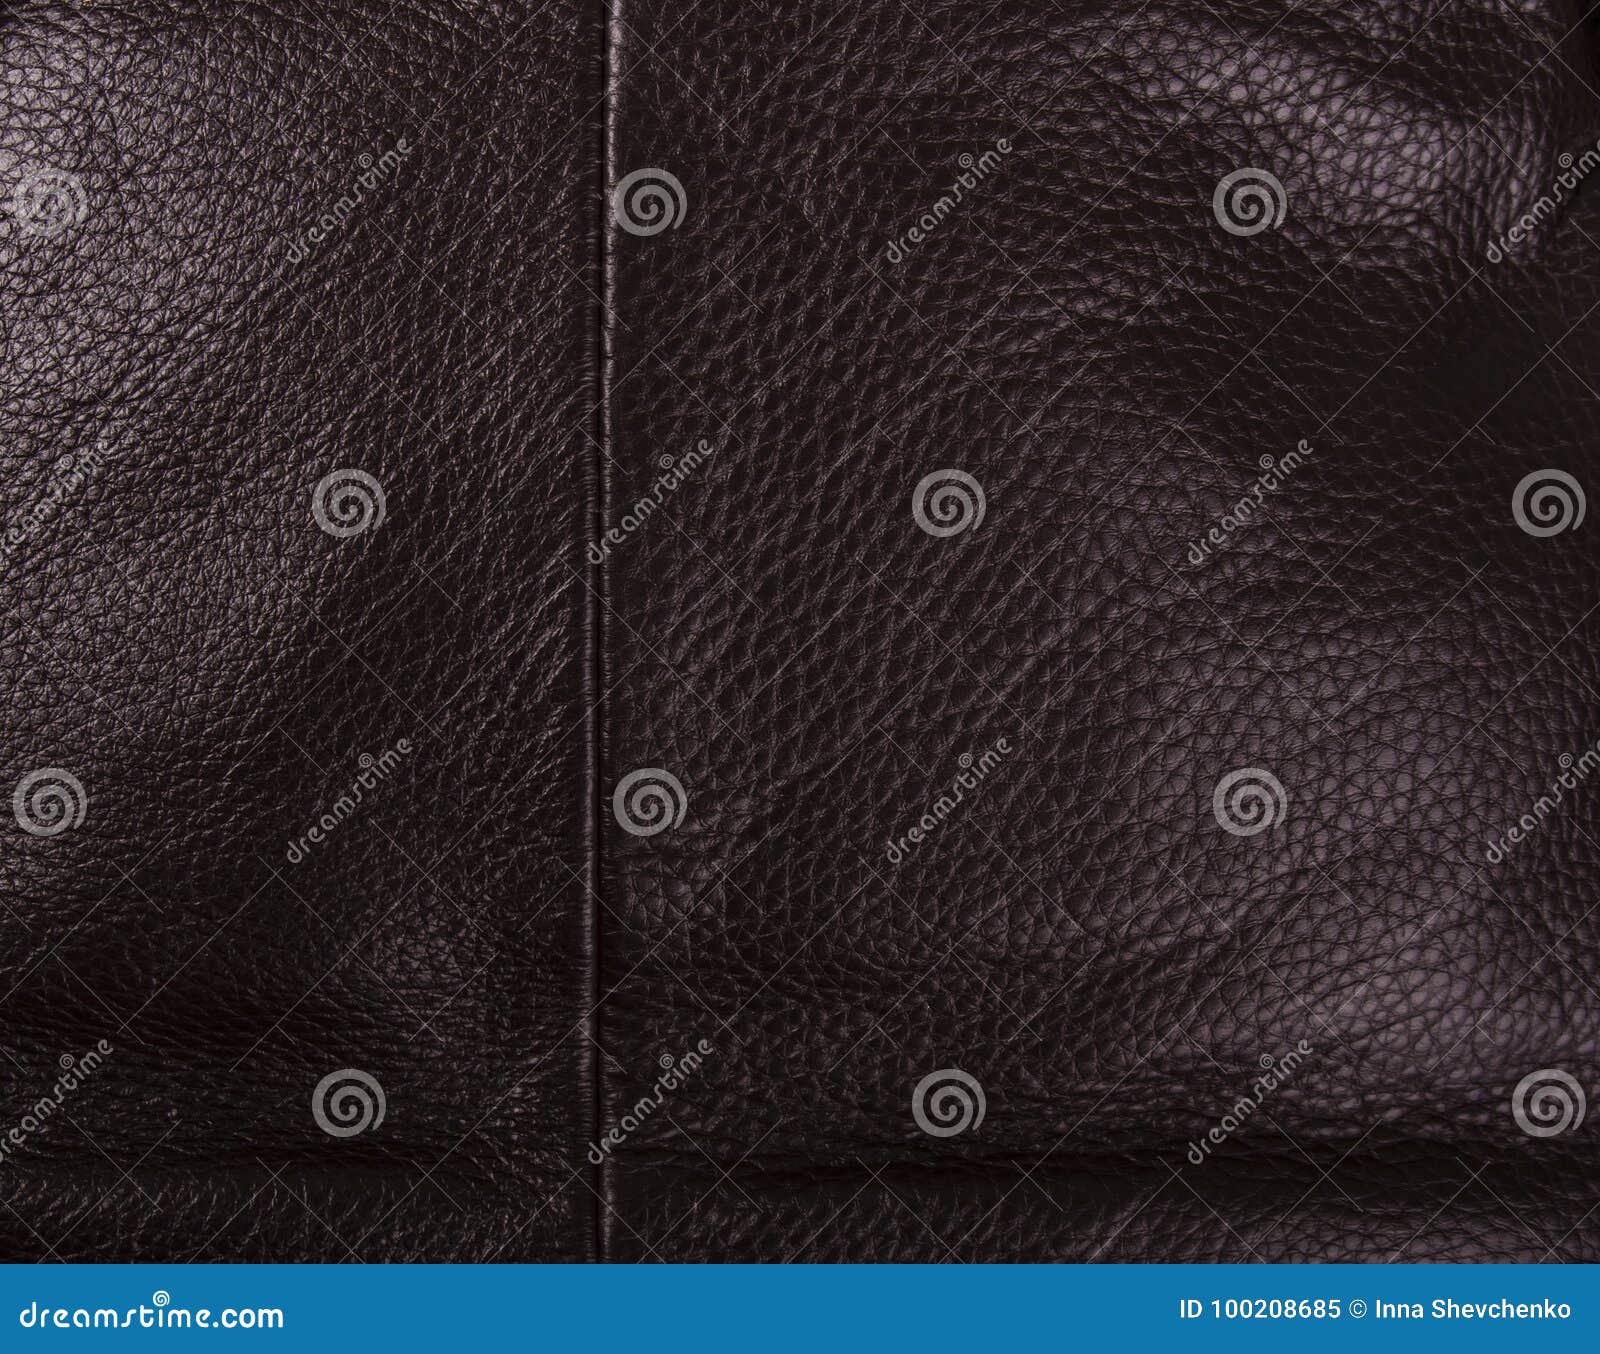 Brown Leather Texture Background Stock Image - Image of rough ...